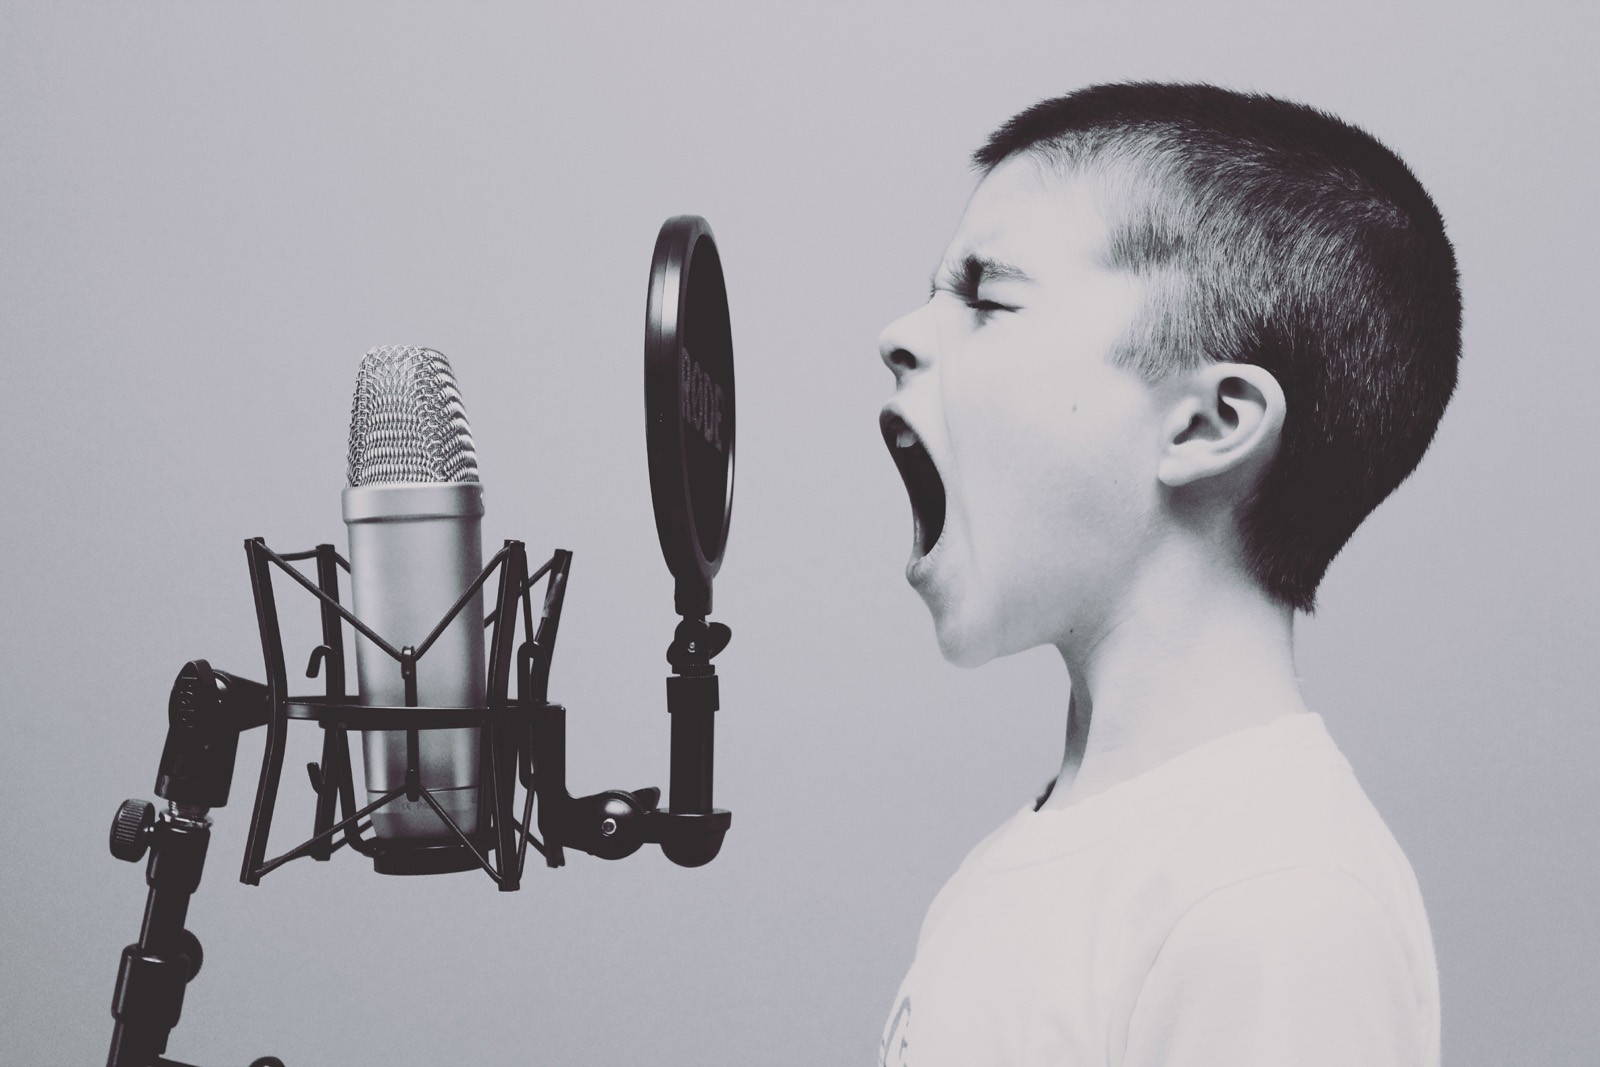 Frequently asked questions about book publicity. A child screaming into a microphone to convey the different ways to publicize your book.